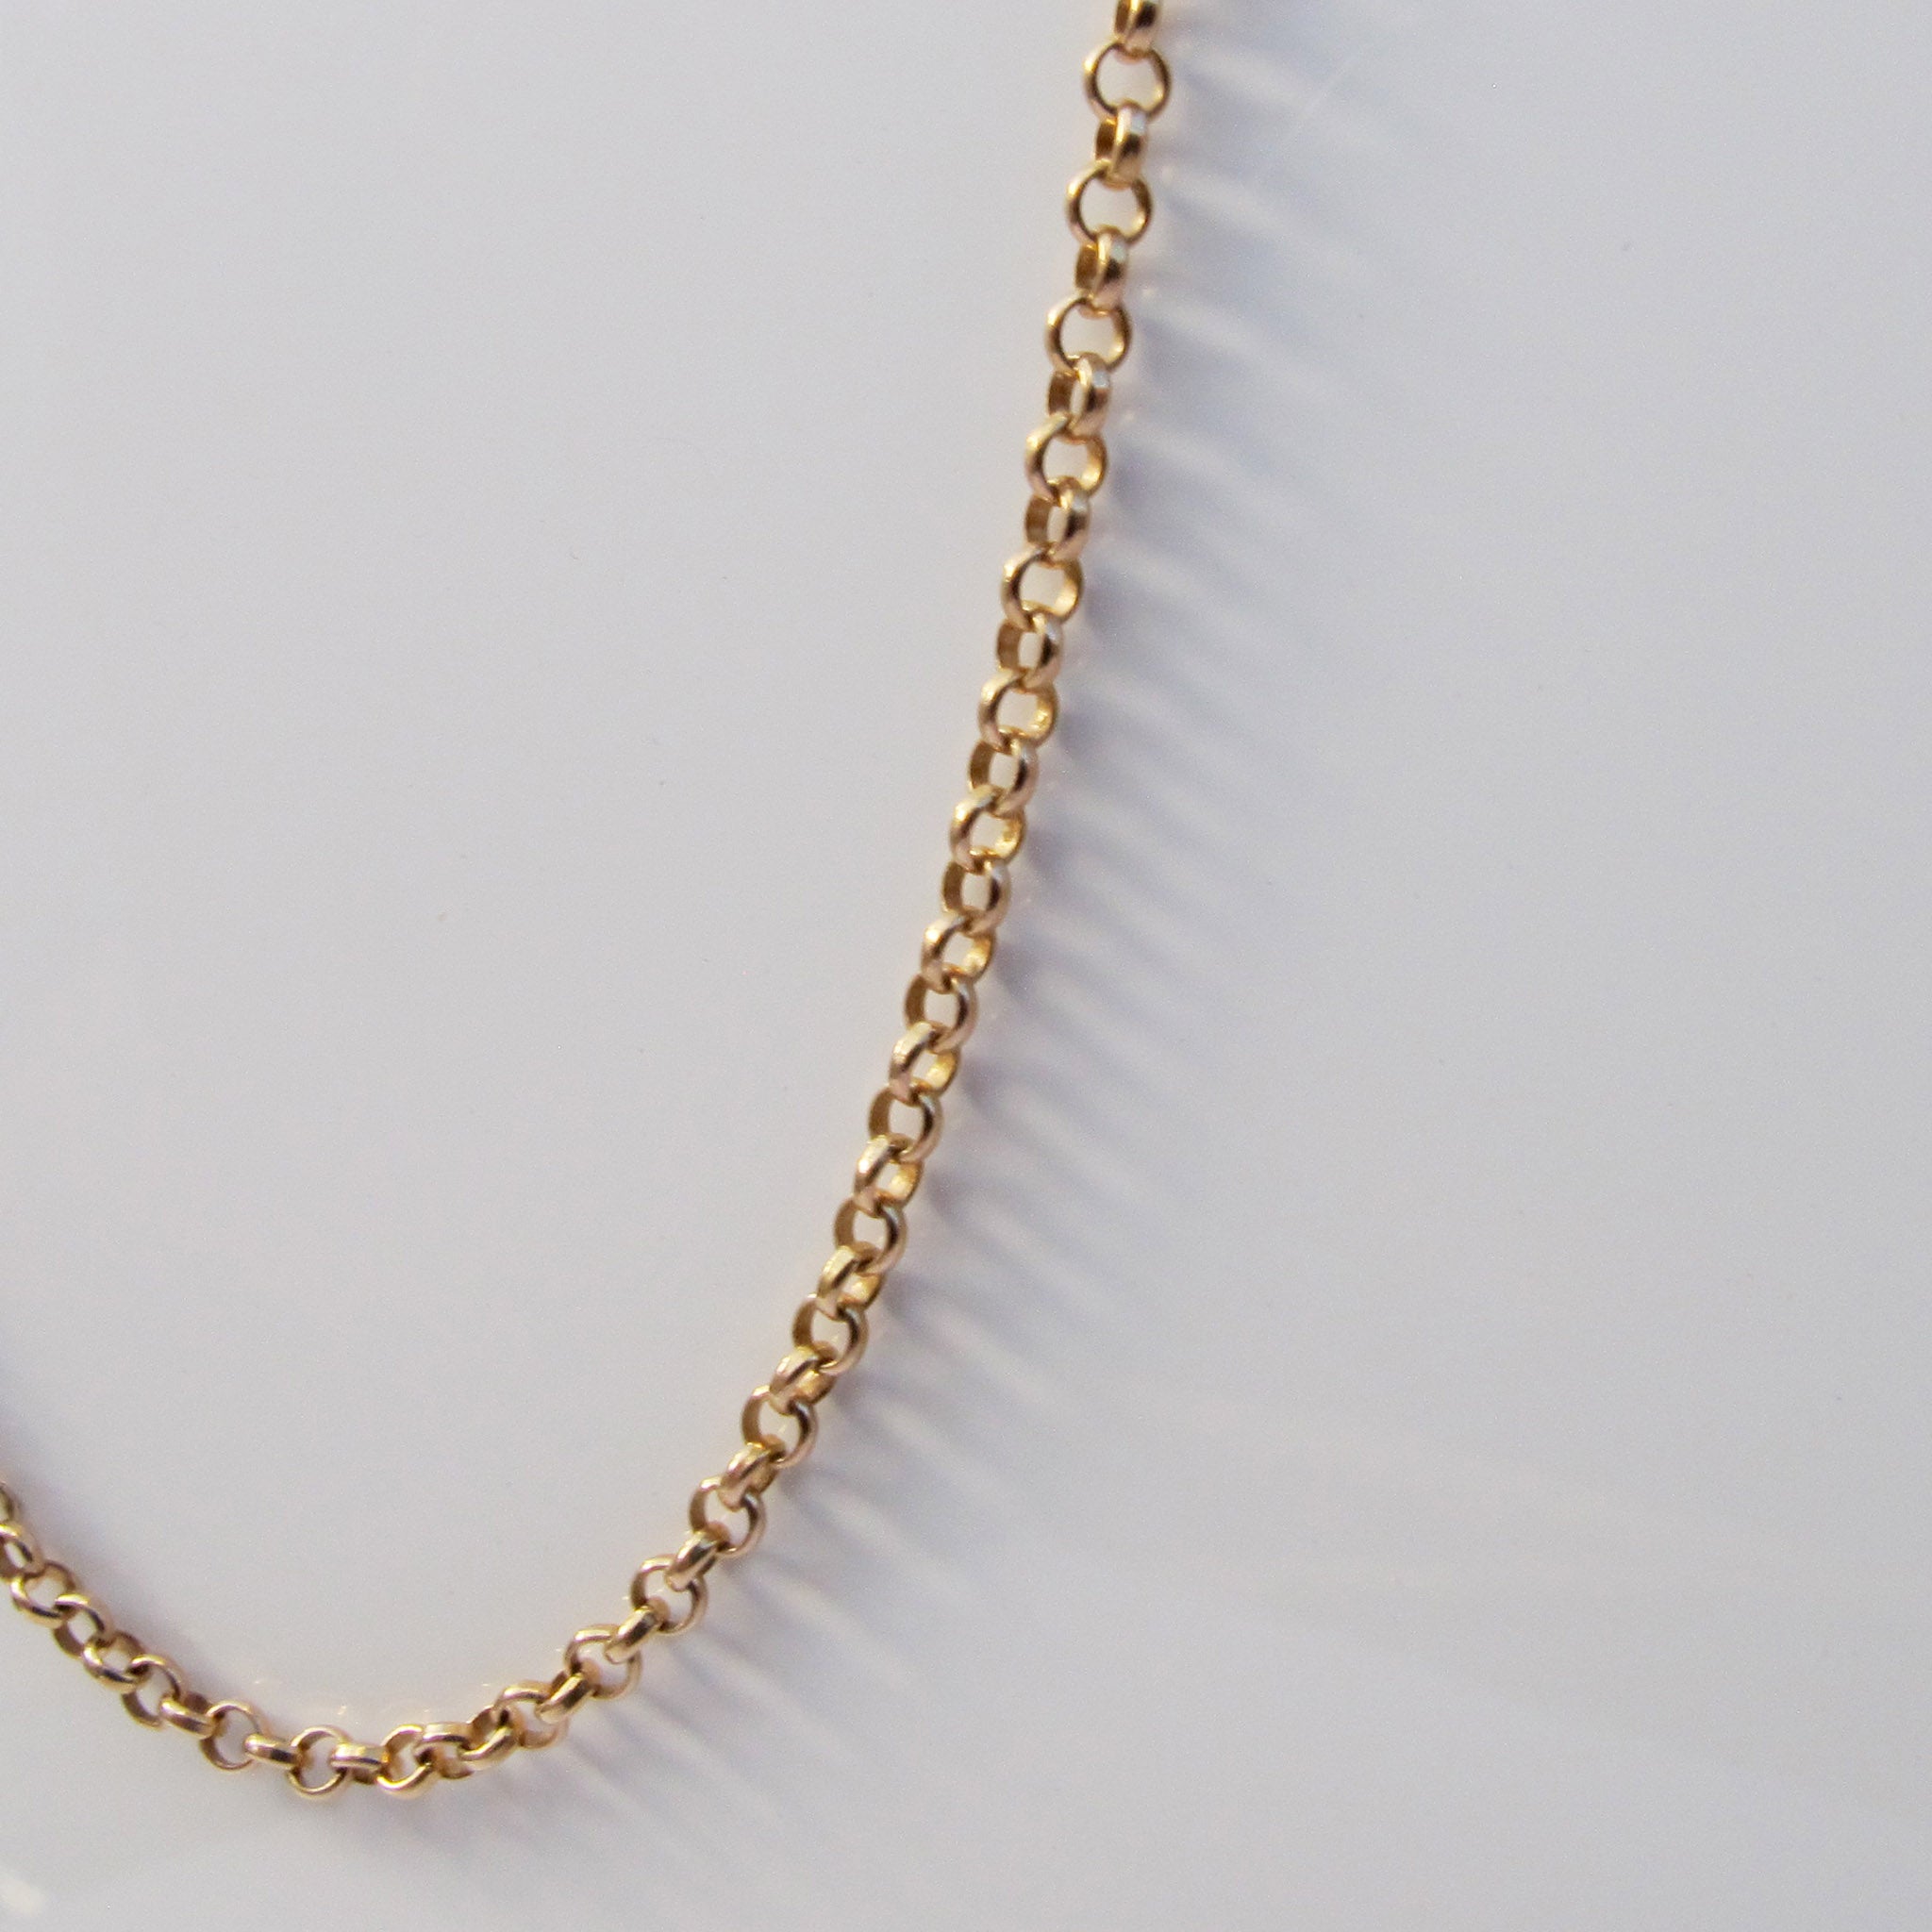 SILVER Hollow Belcher Chain Necklace 18